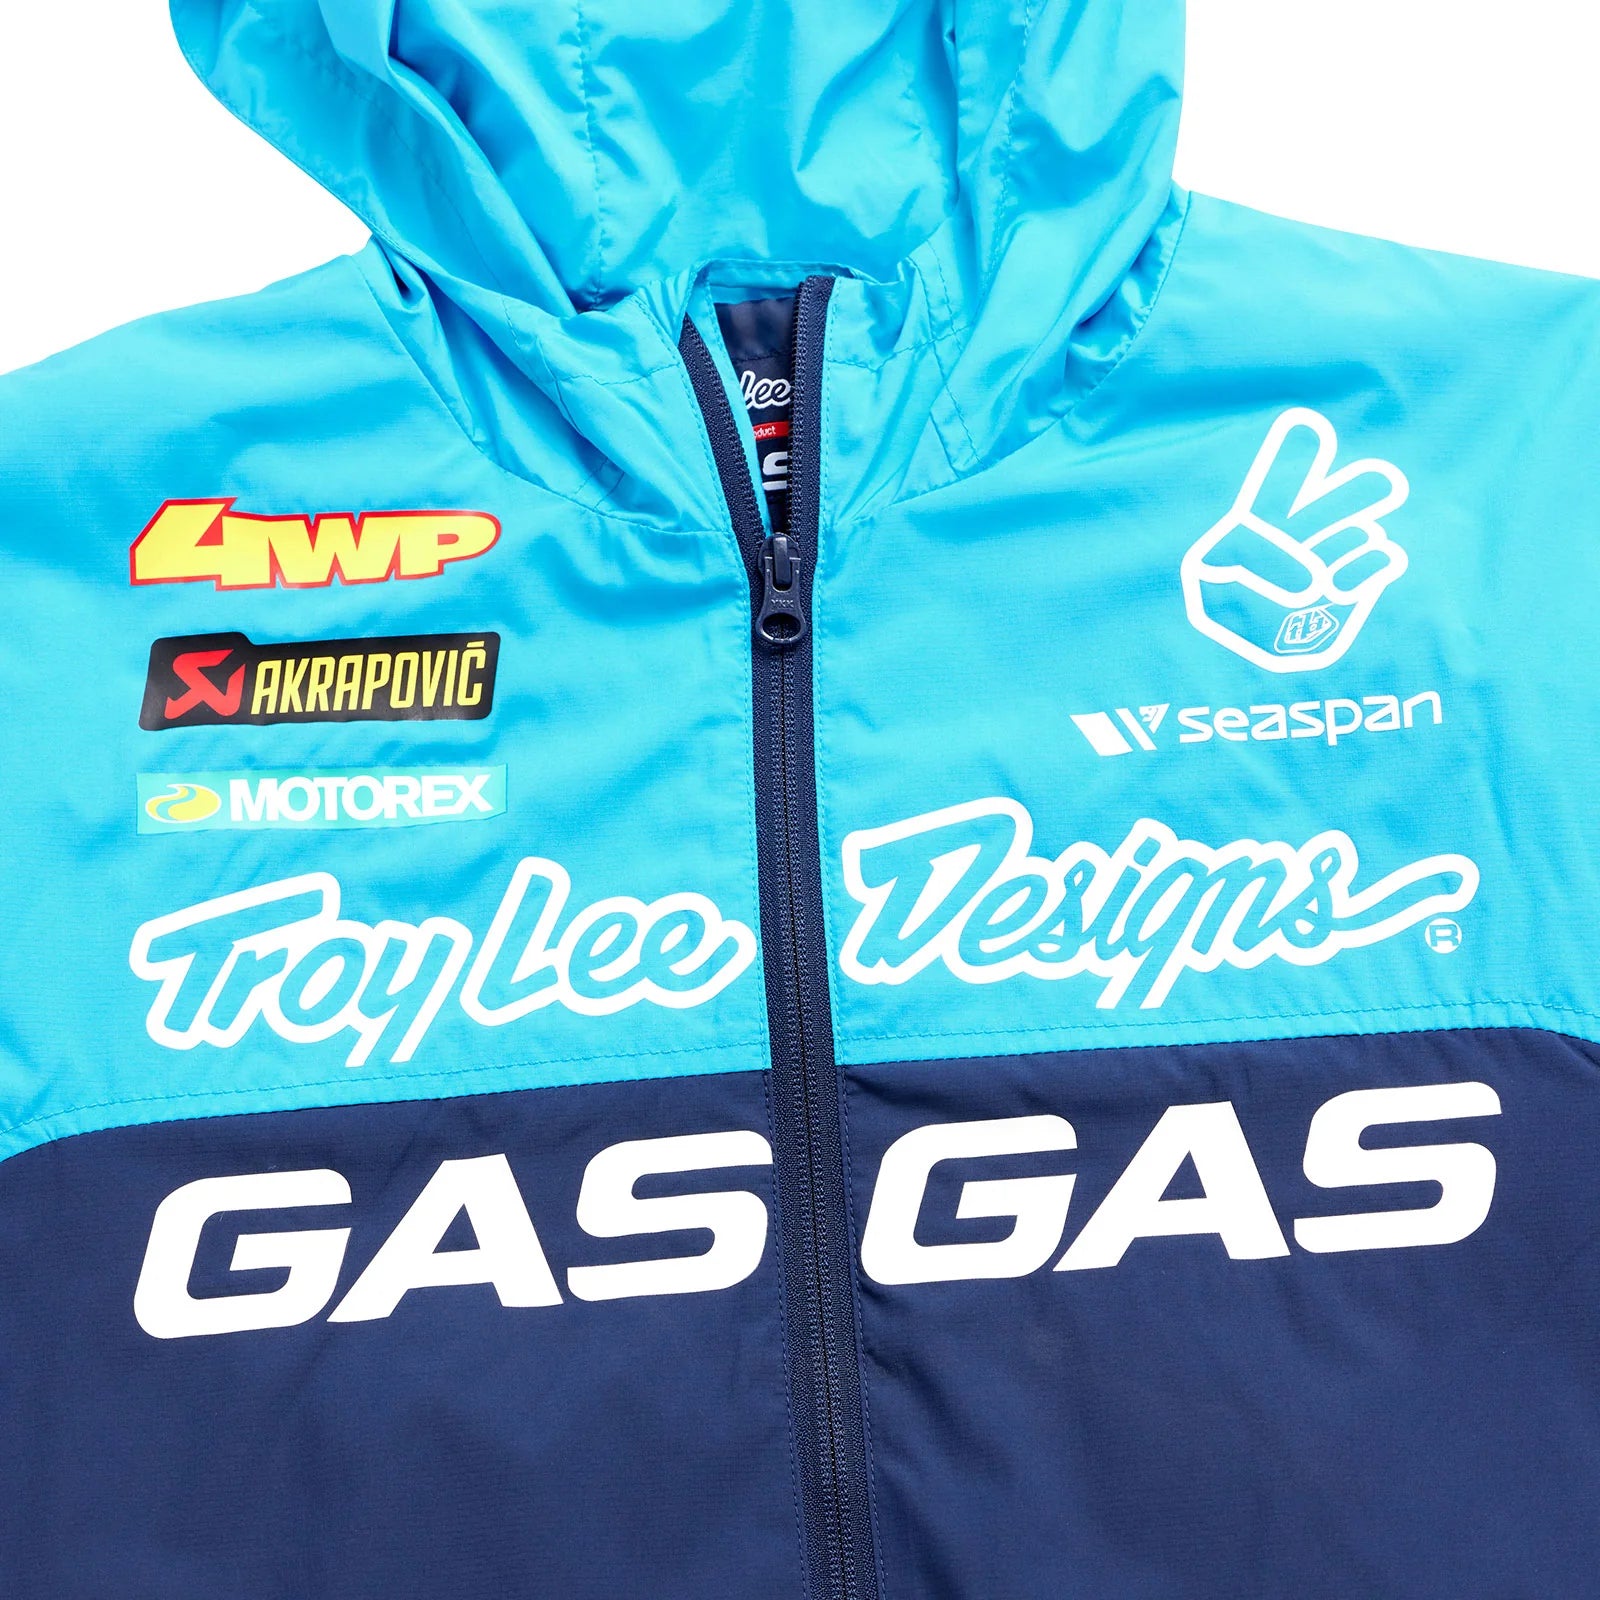 TLD GasGas Team Pit Jacket Navy/Red